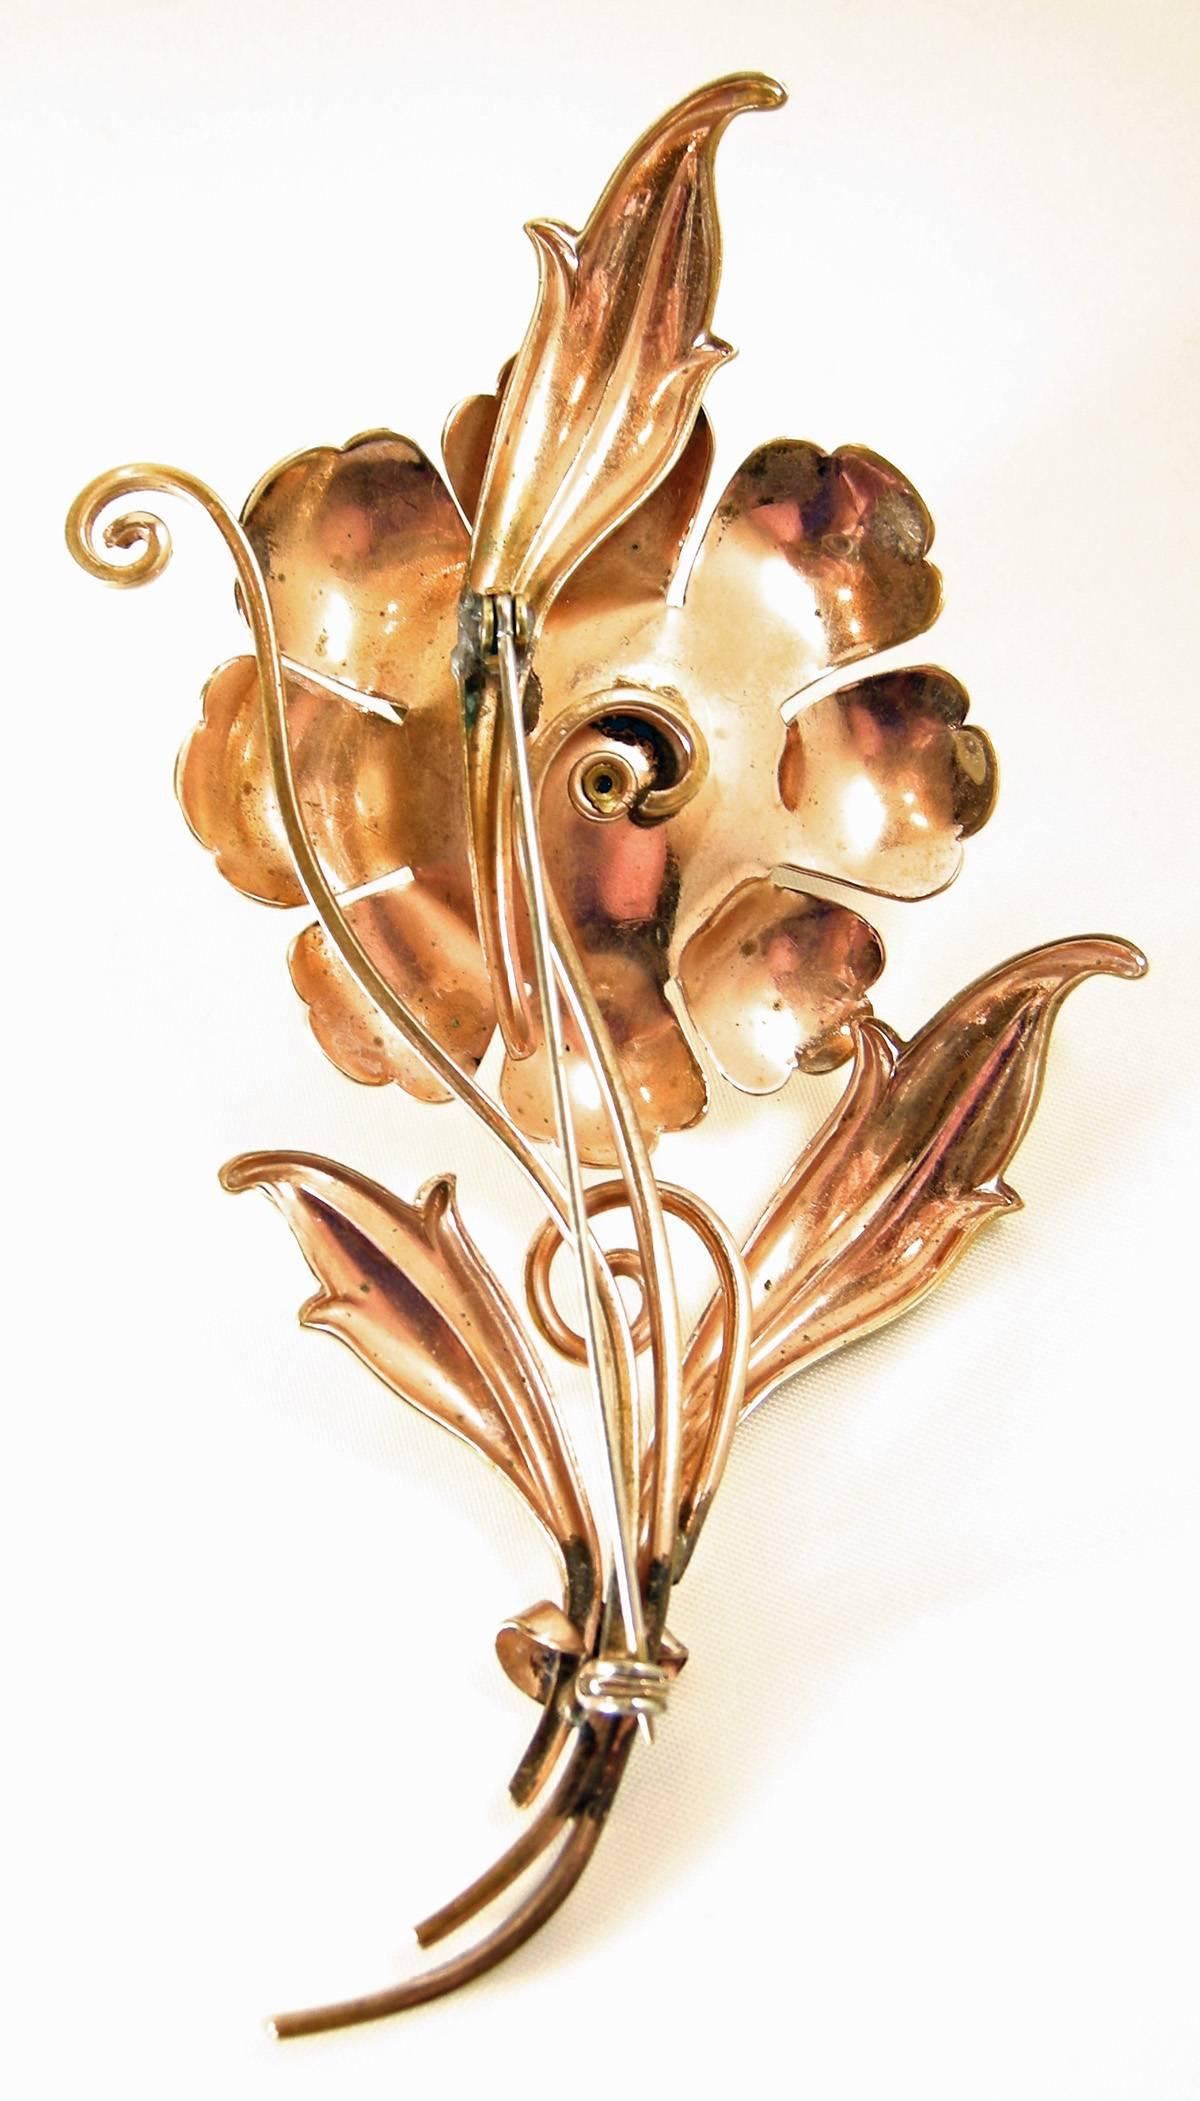 This is a huge flower brooch that is 5” long and 2-1/2” wide.  At first, I thought it sterling with a gold vermeil but there are no silver markings.  The brooch has leaves protruding at the bottom and at the very top from the flower.  The flower